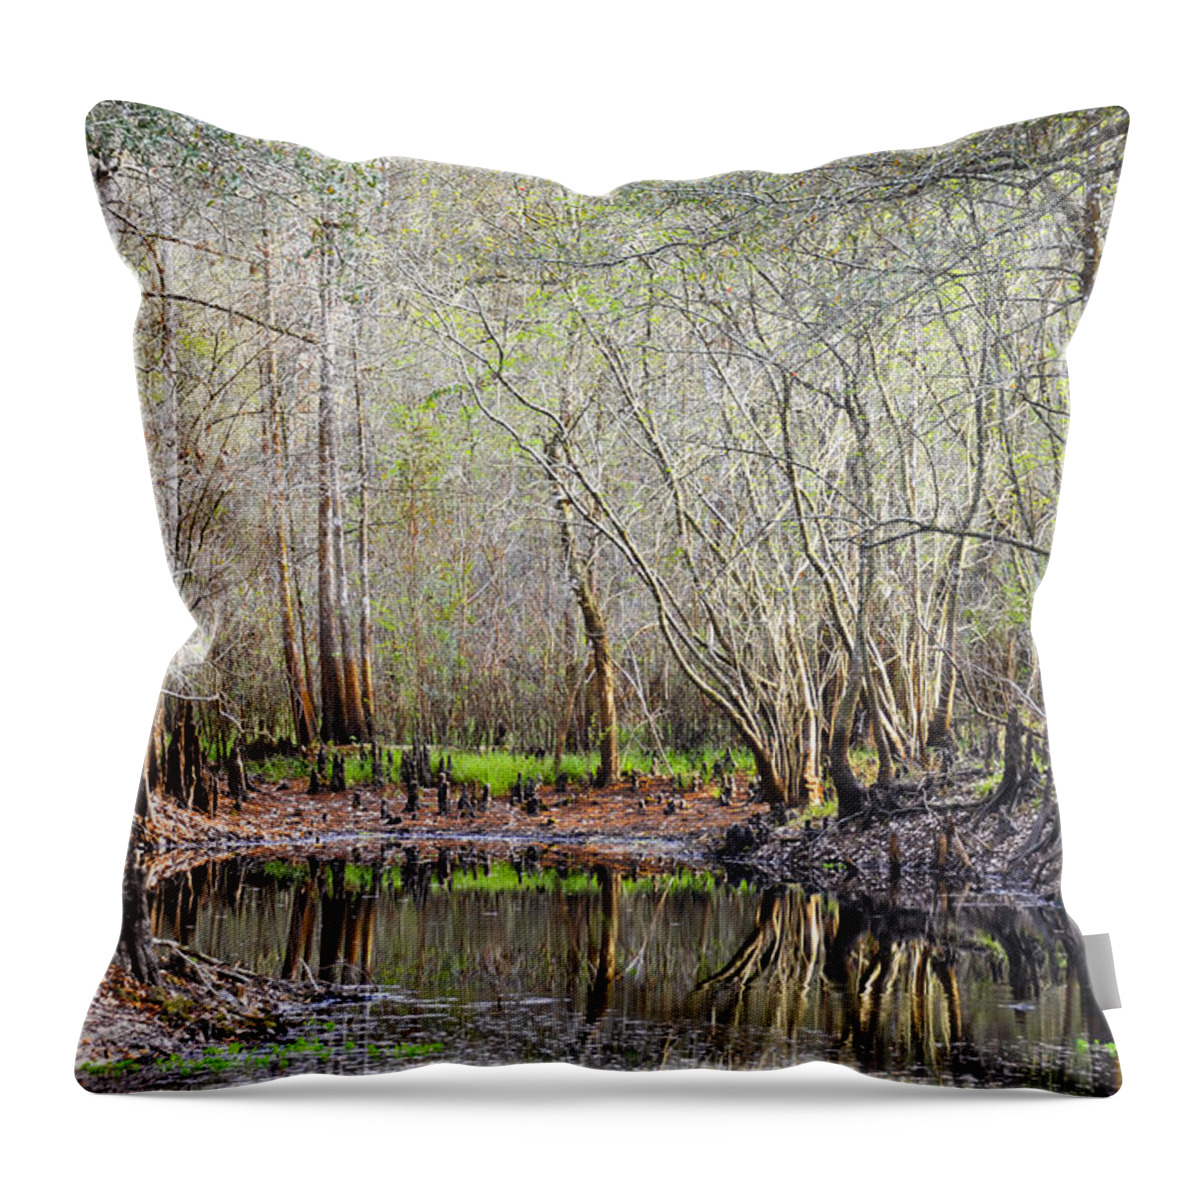 Cypress Trees Throw Pillow featuring the photograph A Quiet Back Woods Place by Carolyn Marshall